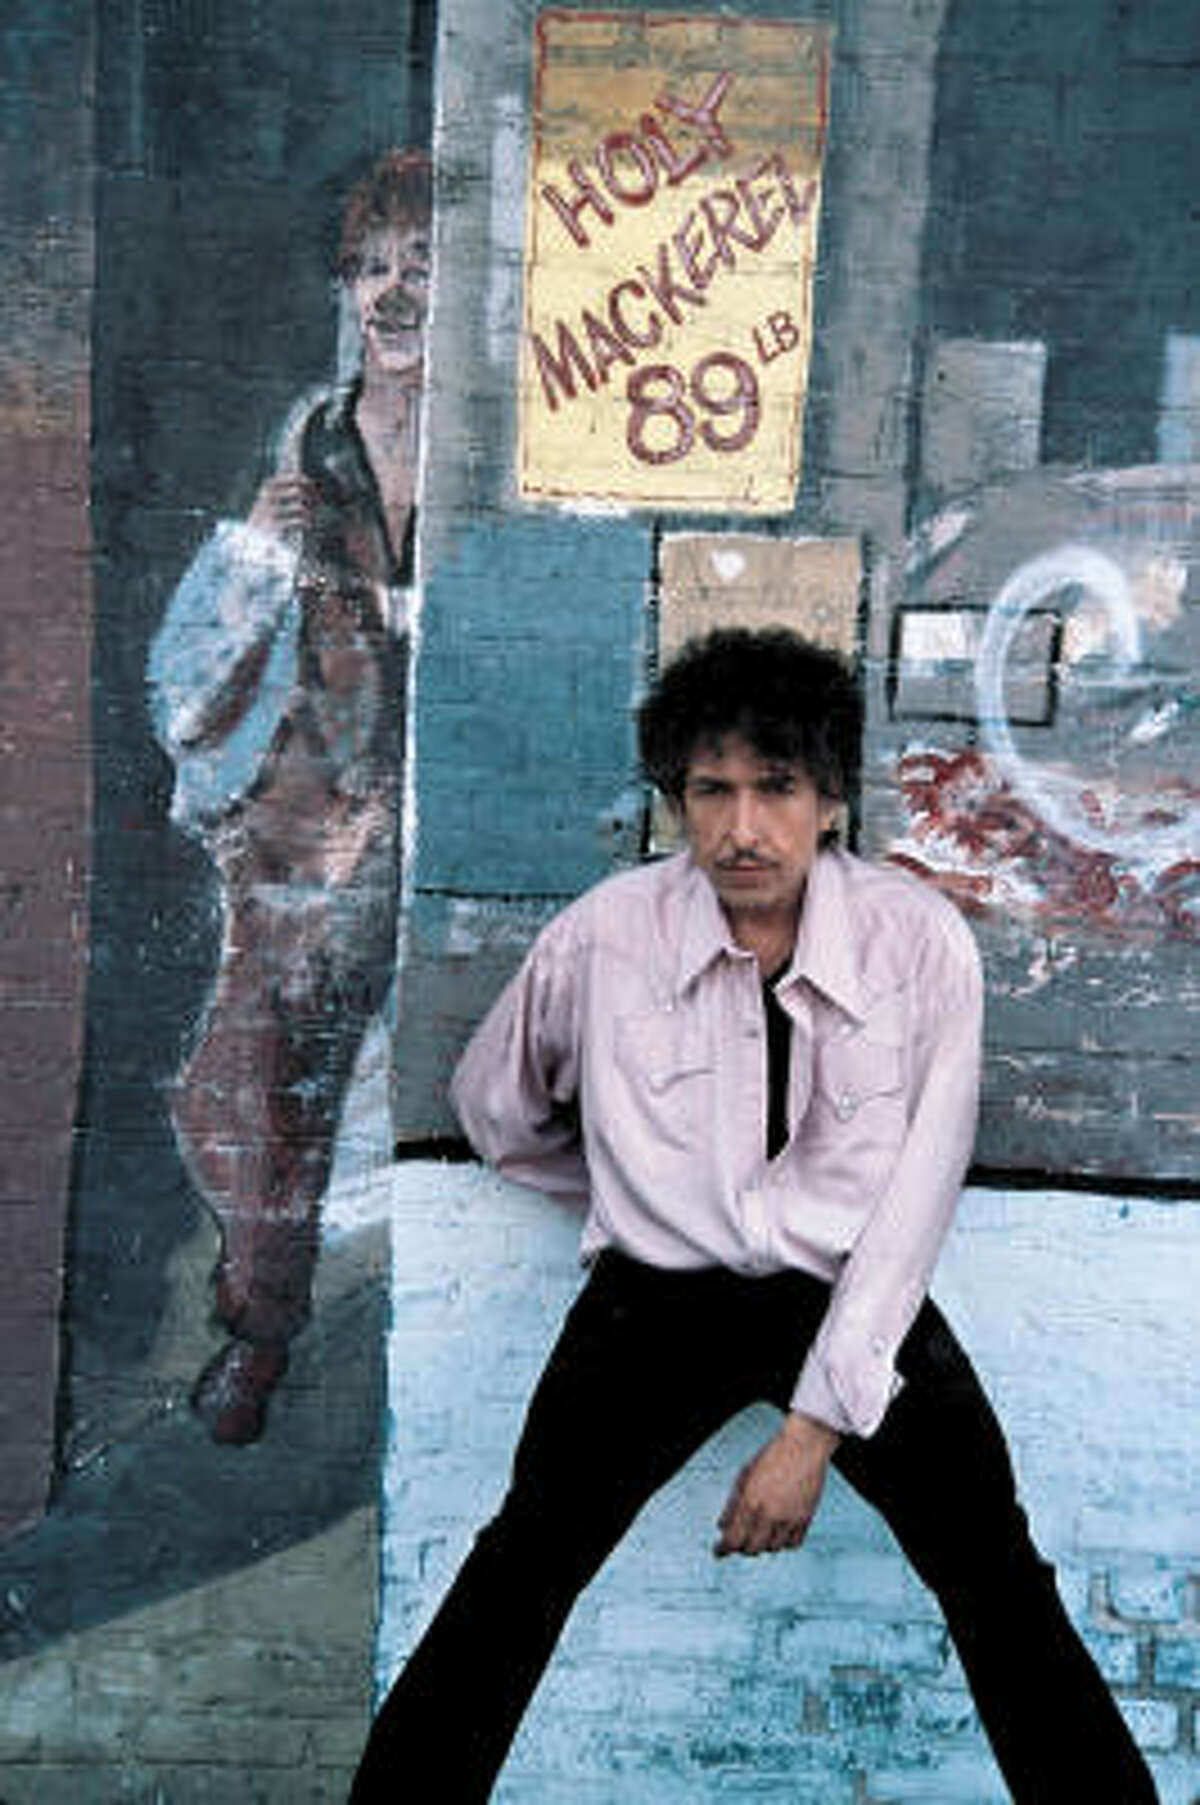 Bob Dylan's album covers sometimes just as powerful as his songs